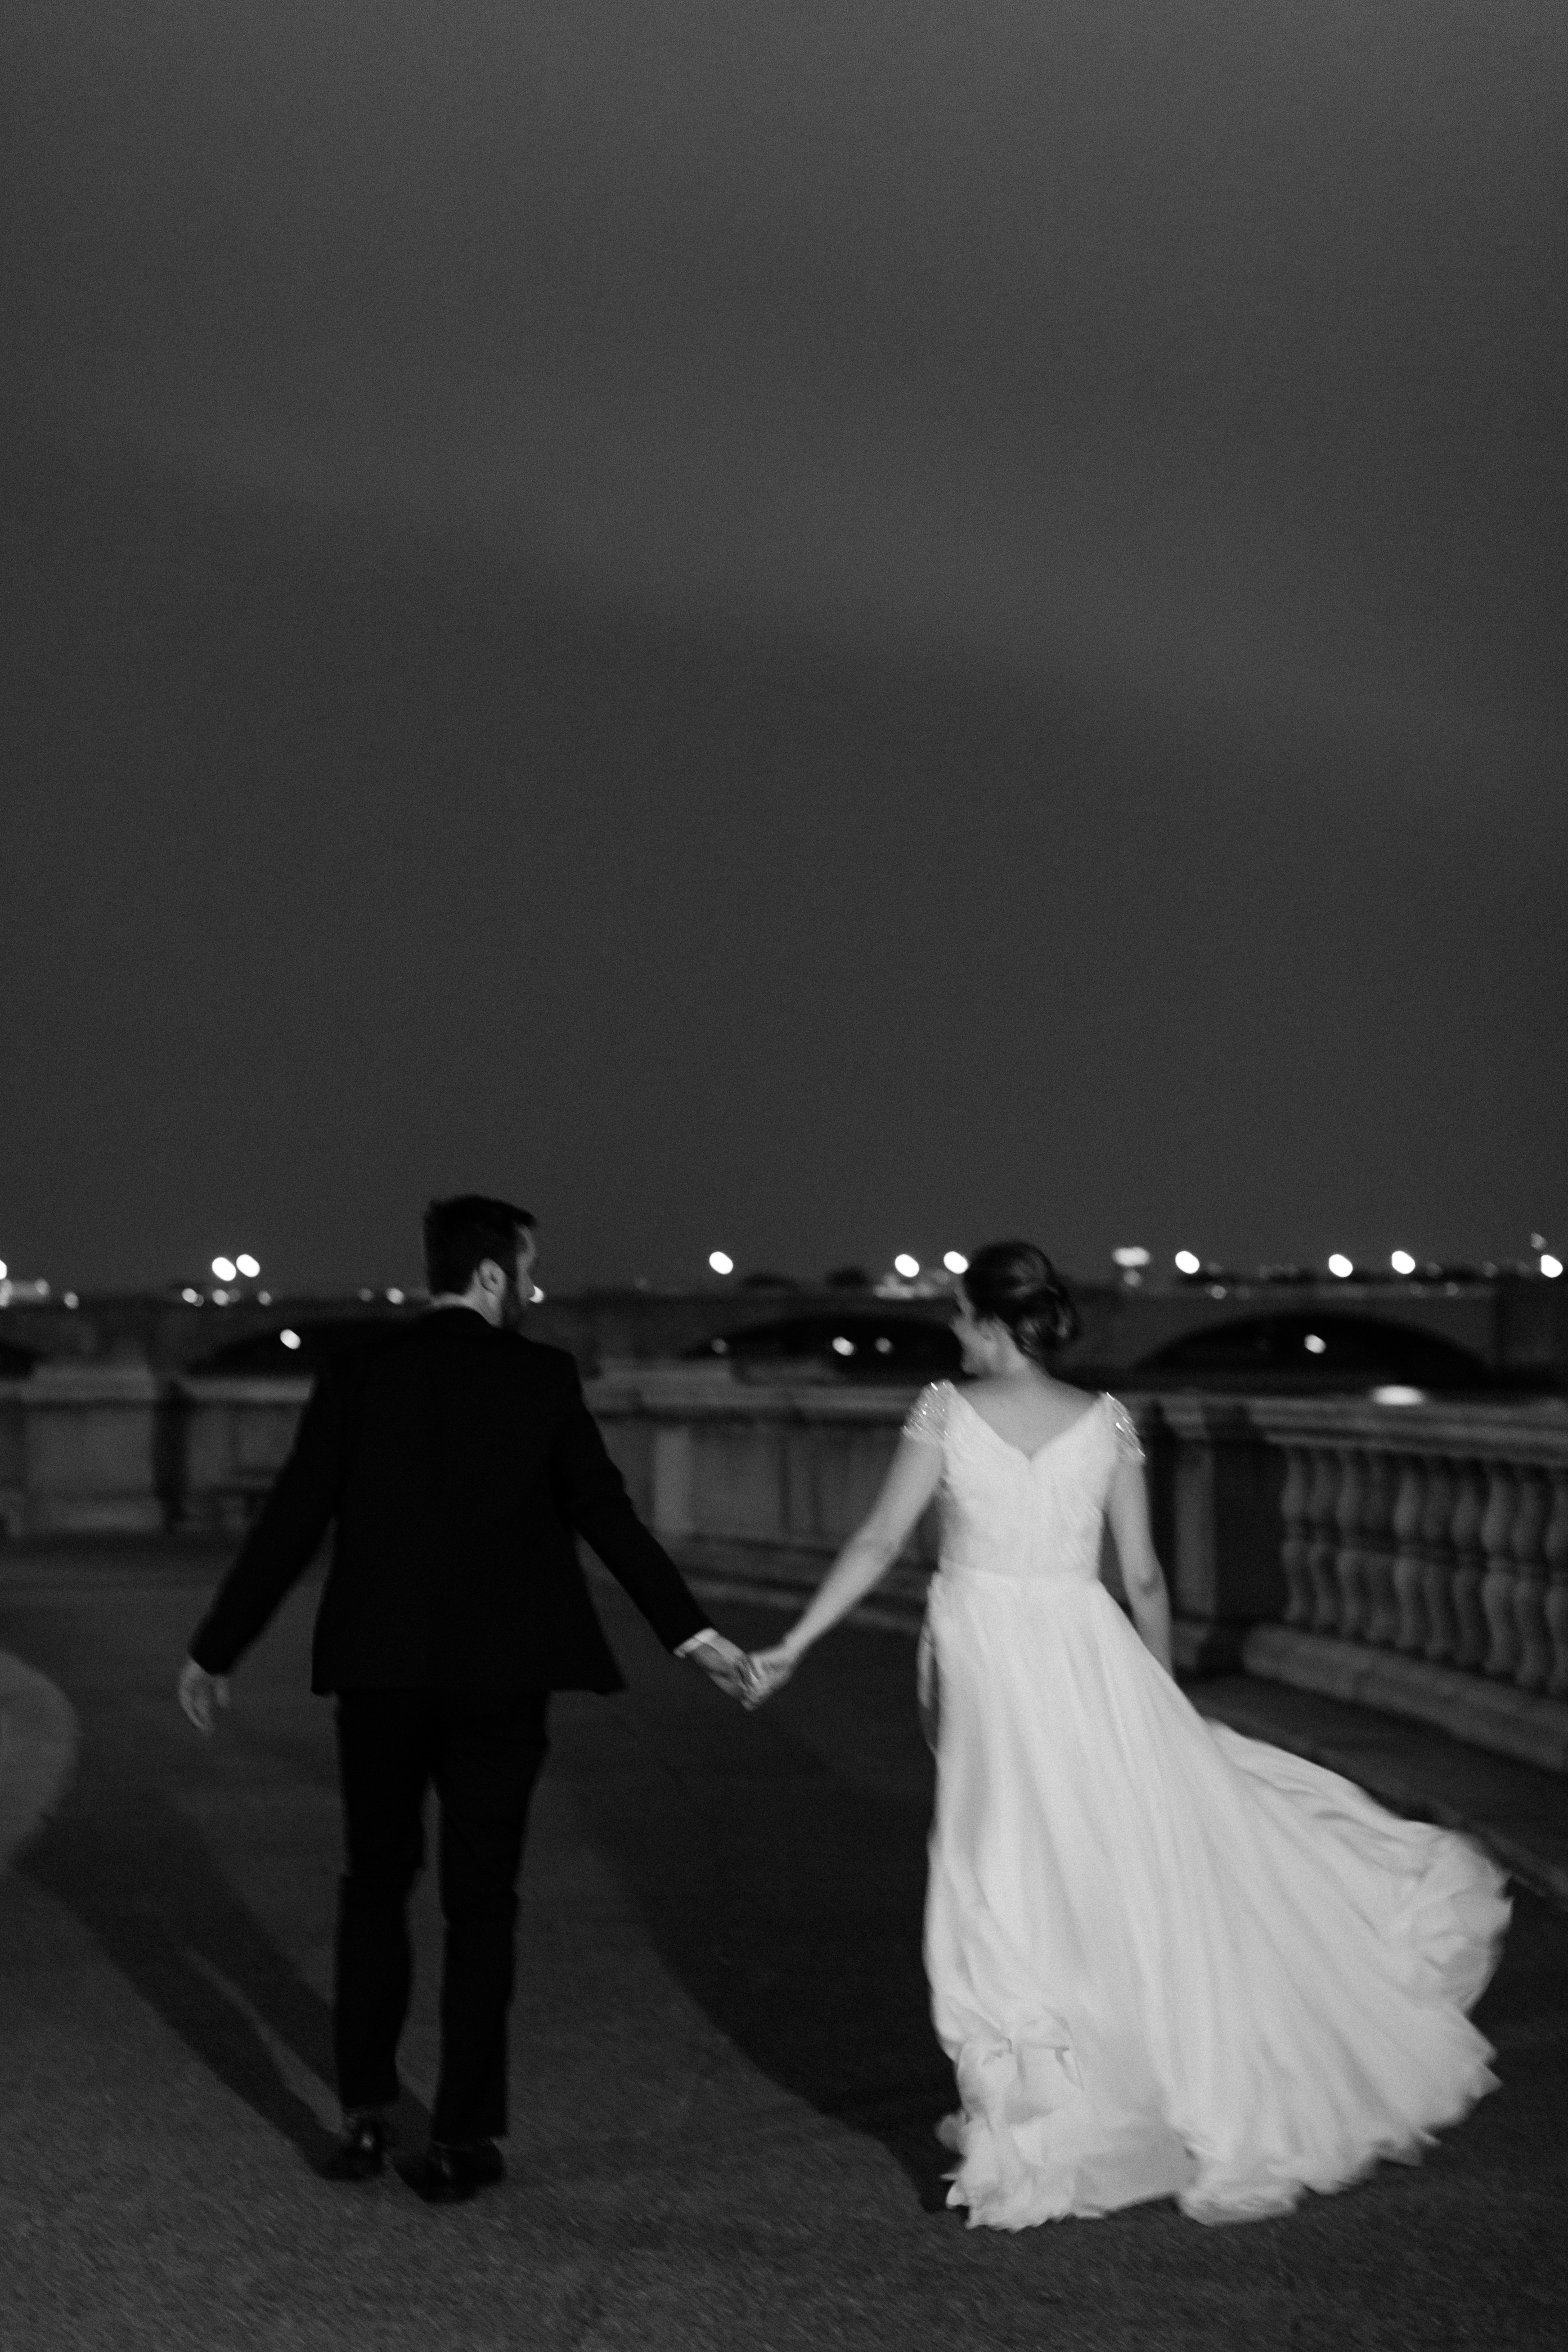 Formal Engagement Portraits on Memorial Bridge in DC, Black Tie Evening Engagement Session at Kennedy Center and Memorial Bridge, Sarah Bradshaw Photography